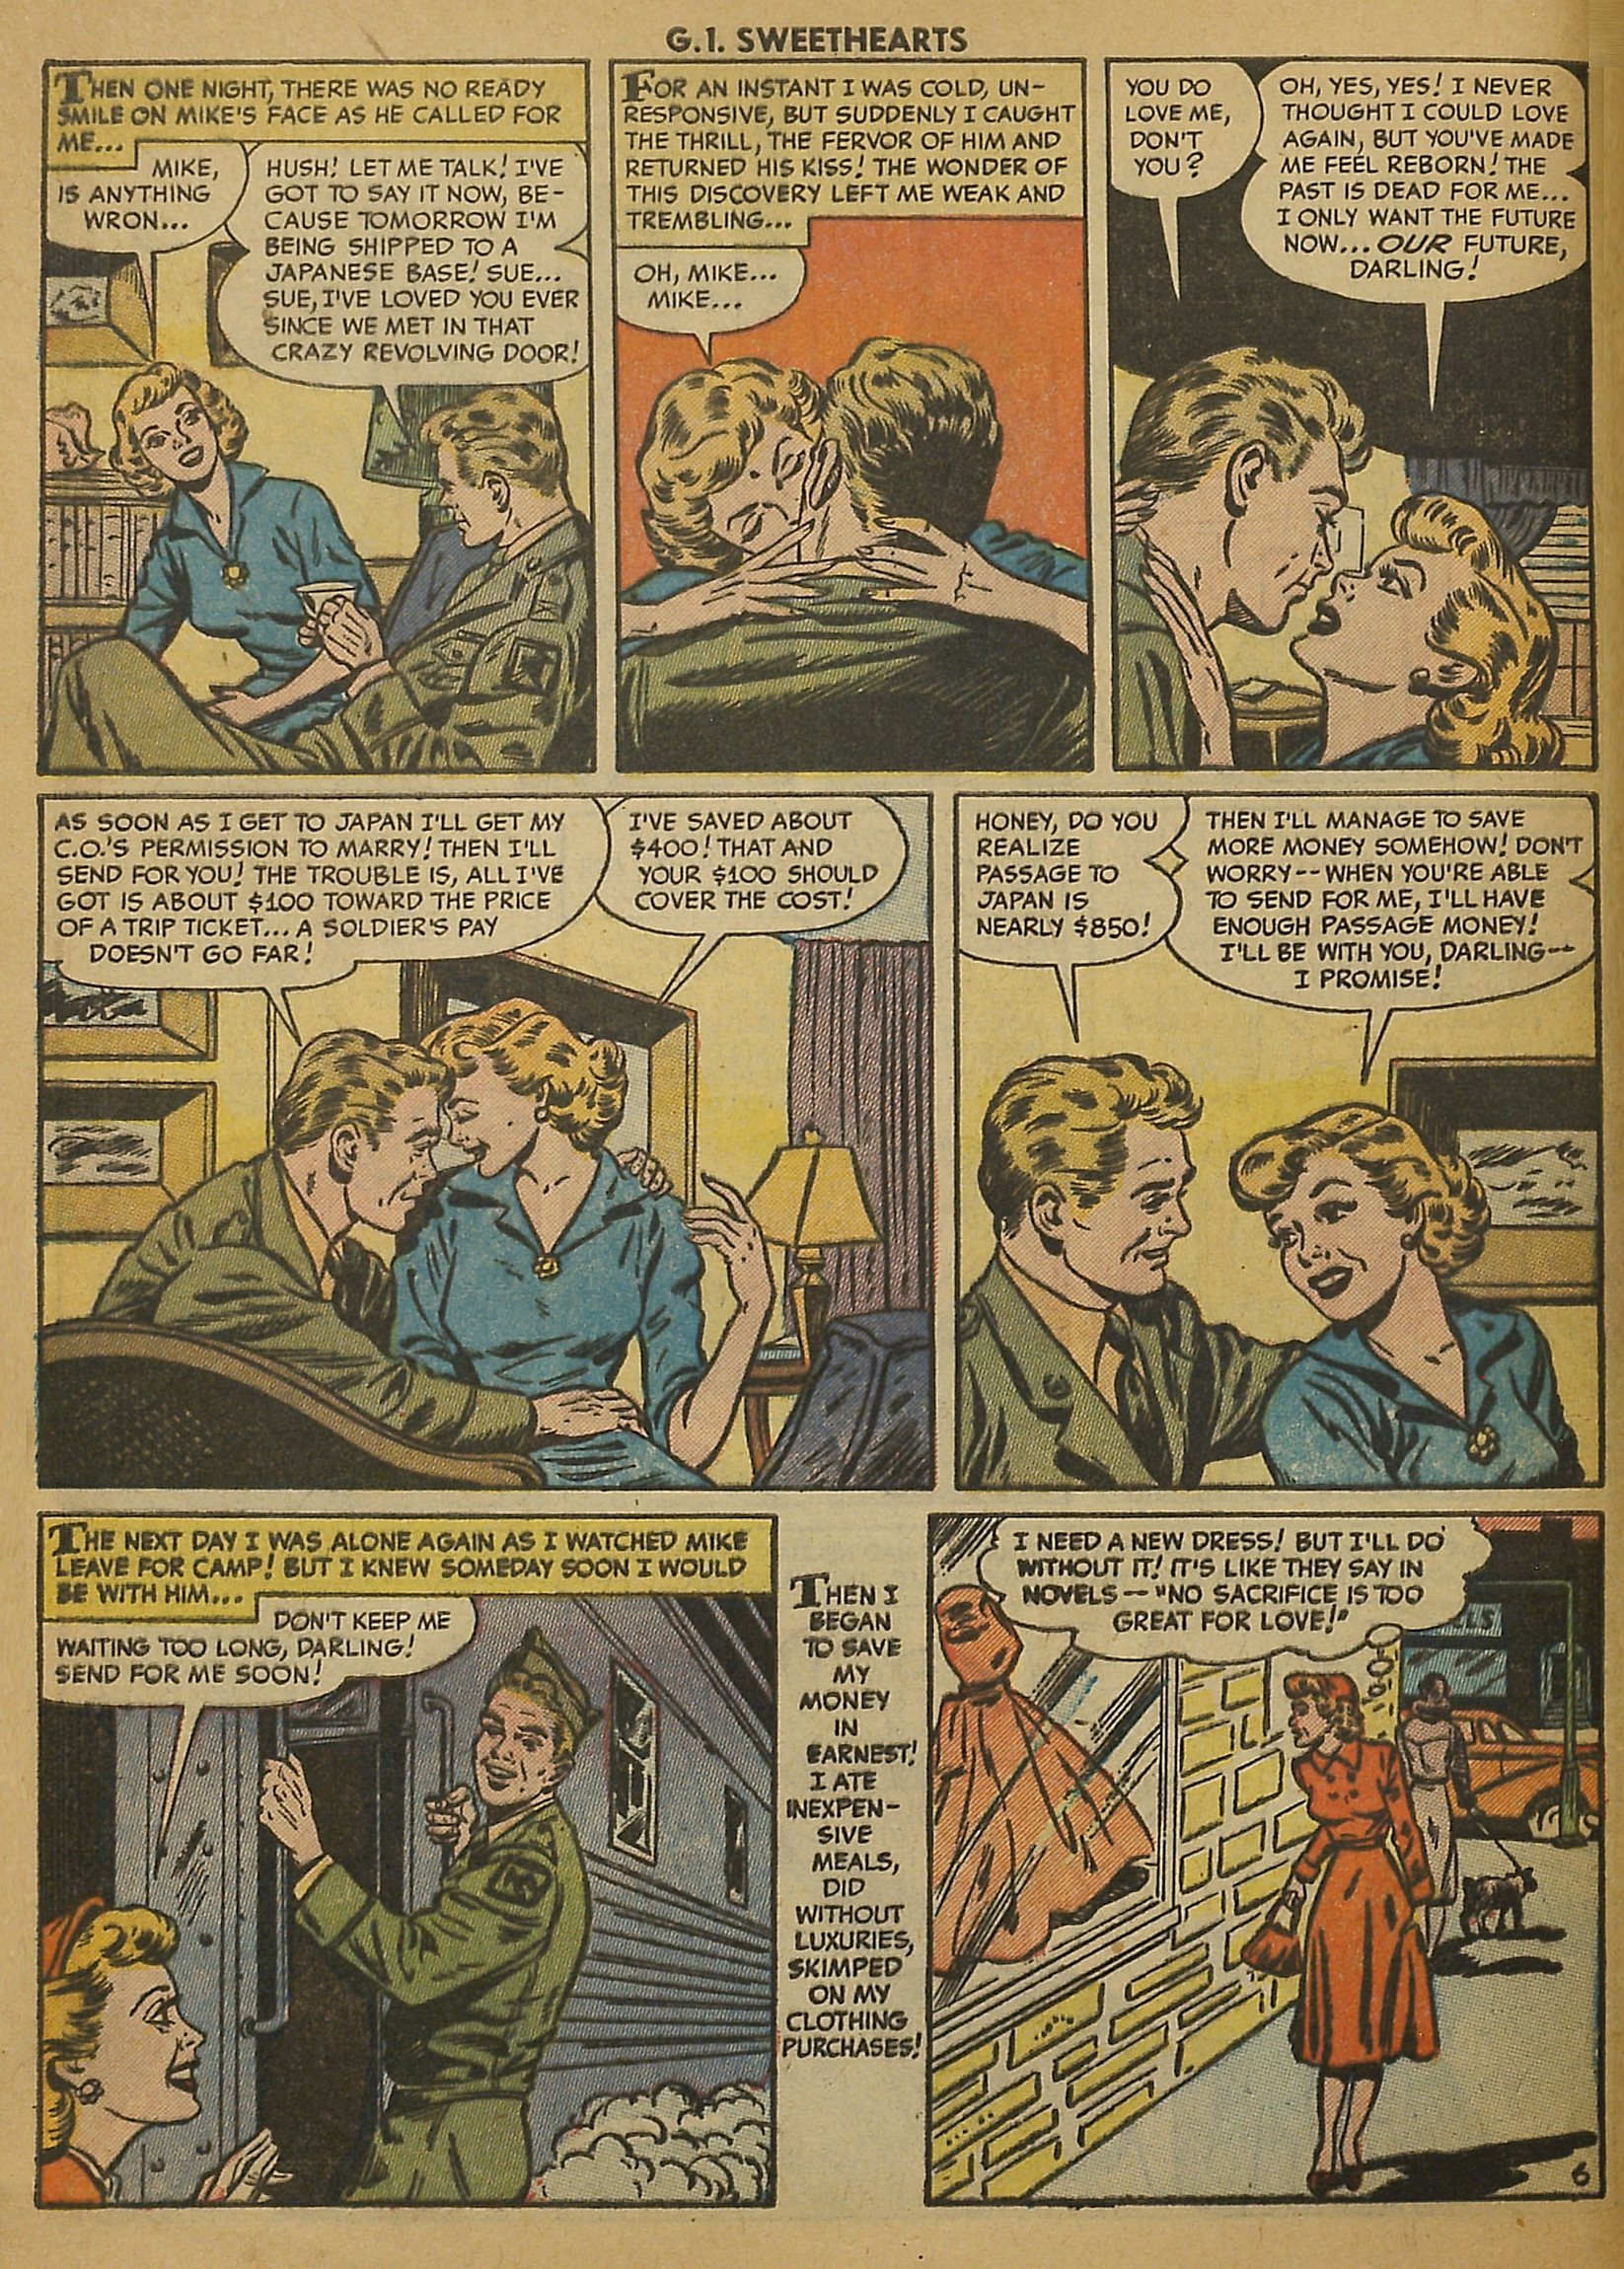 Read online G.I. Sweethearts comic -  Issue #35 - 8